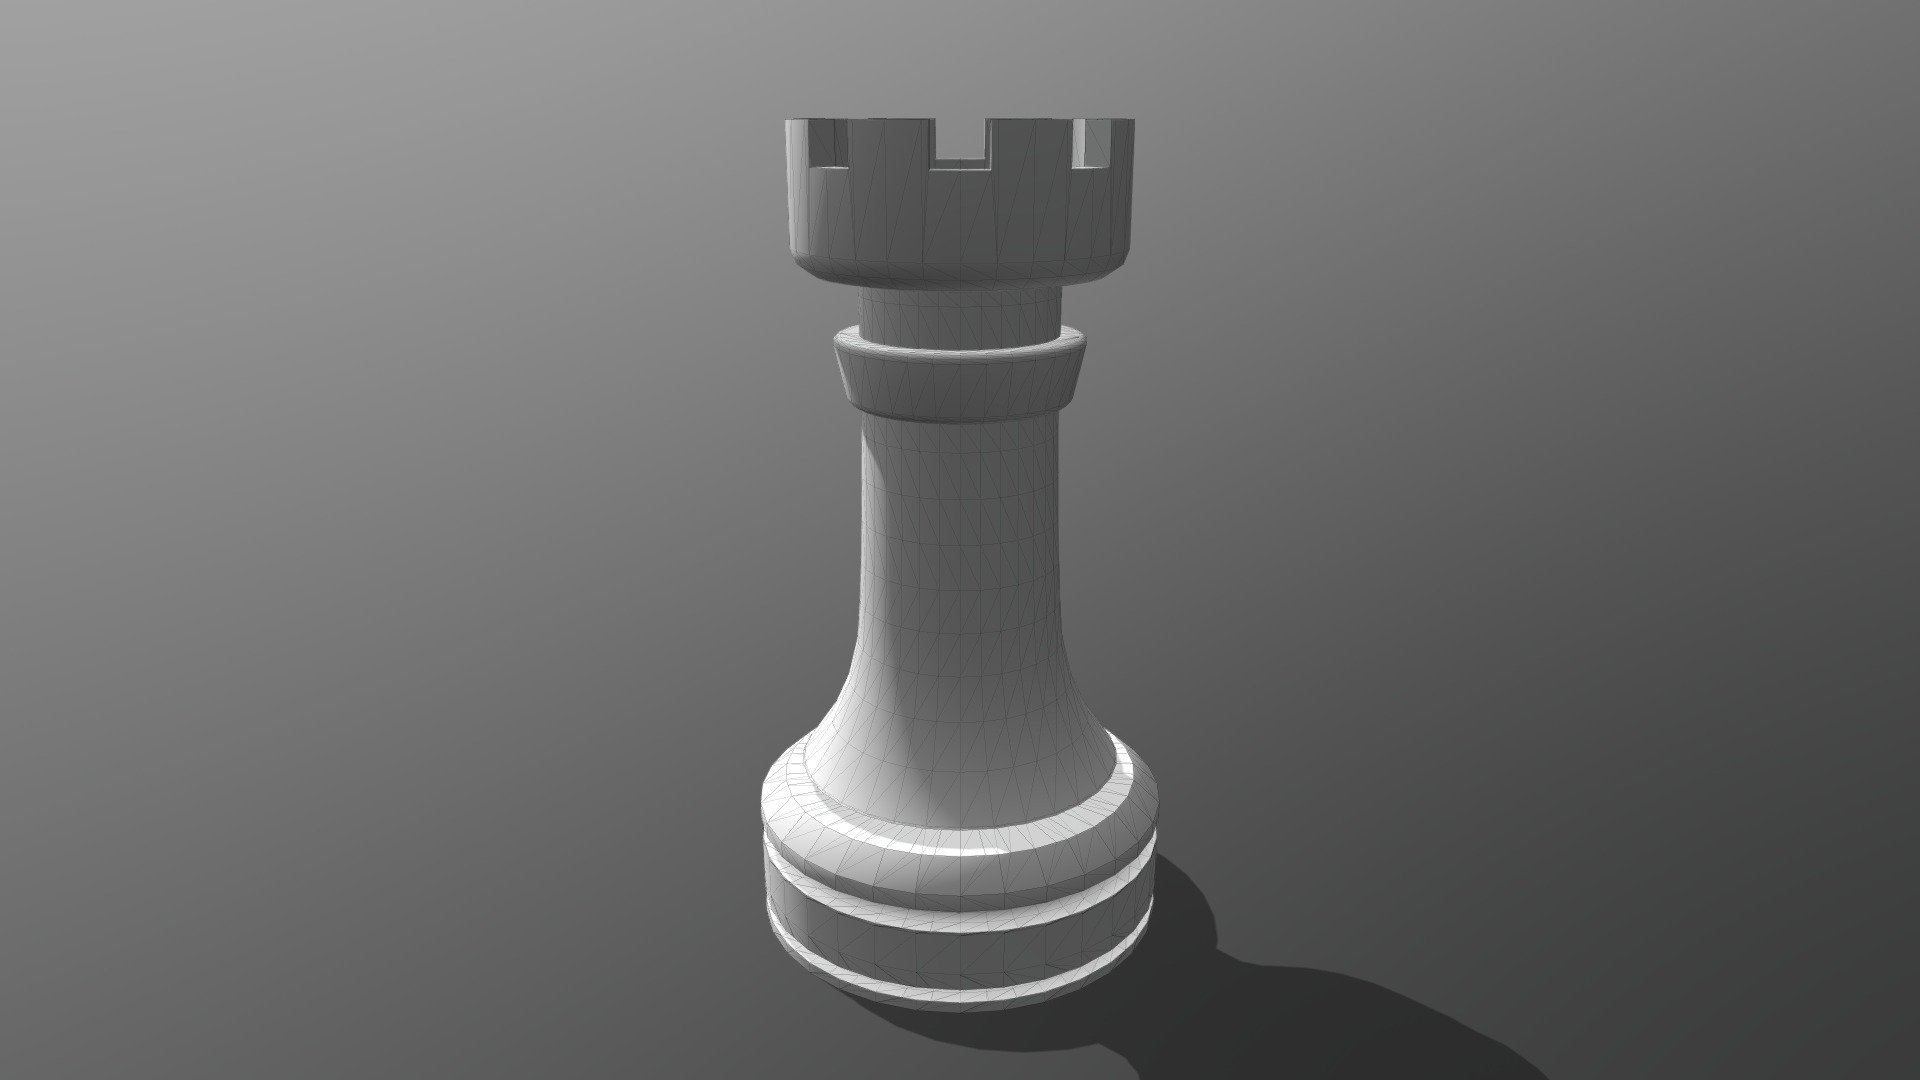 Rook (chess), 3D CAD Model Library